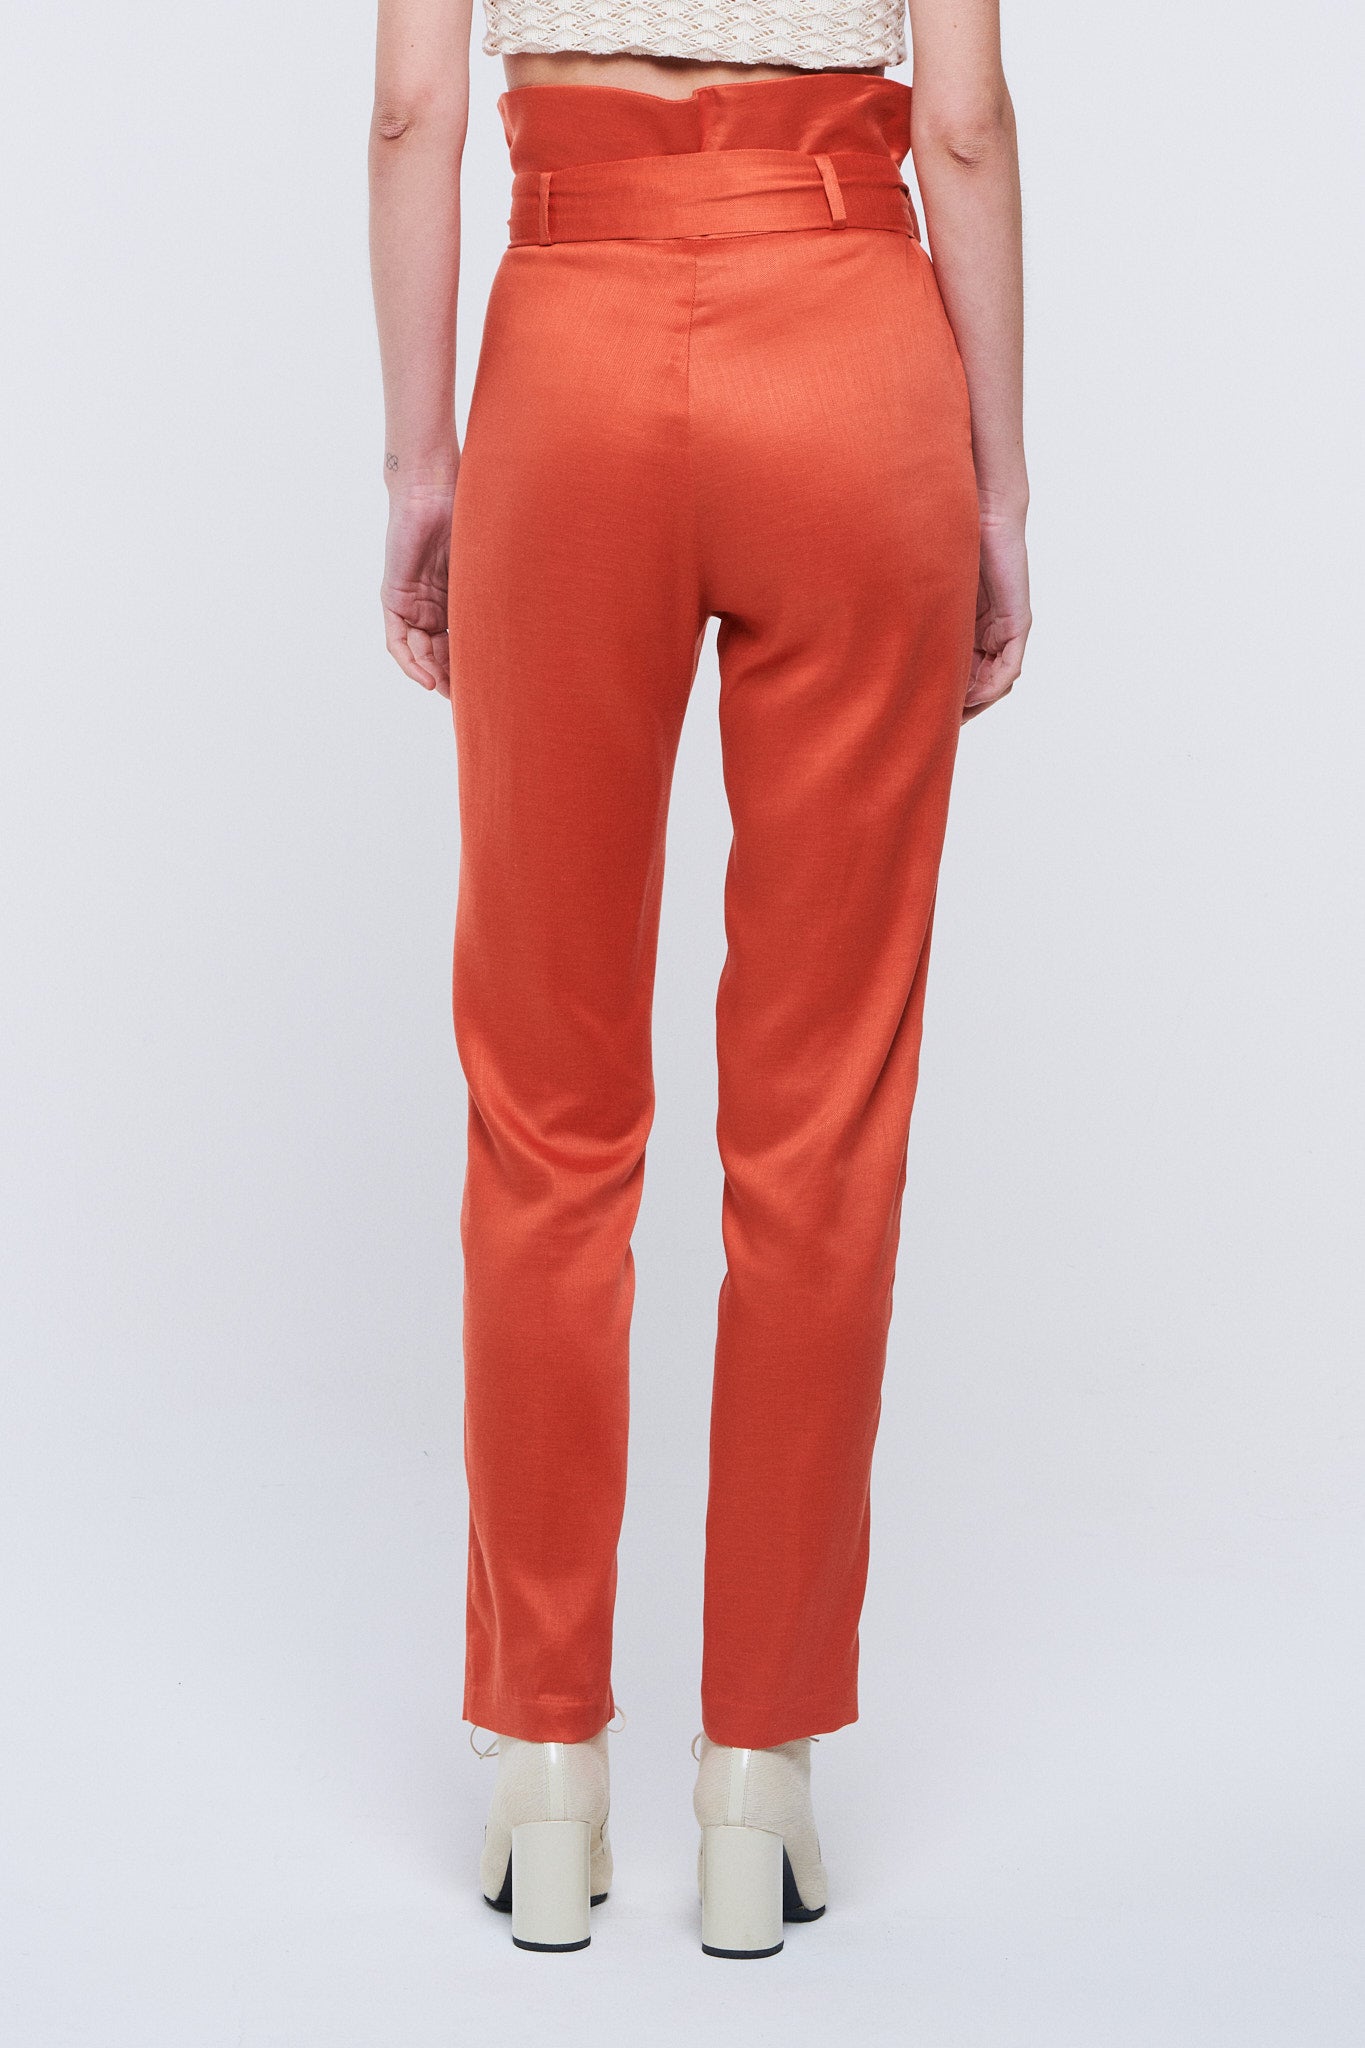 Trousers with orange bow